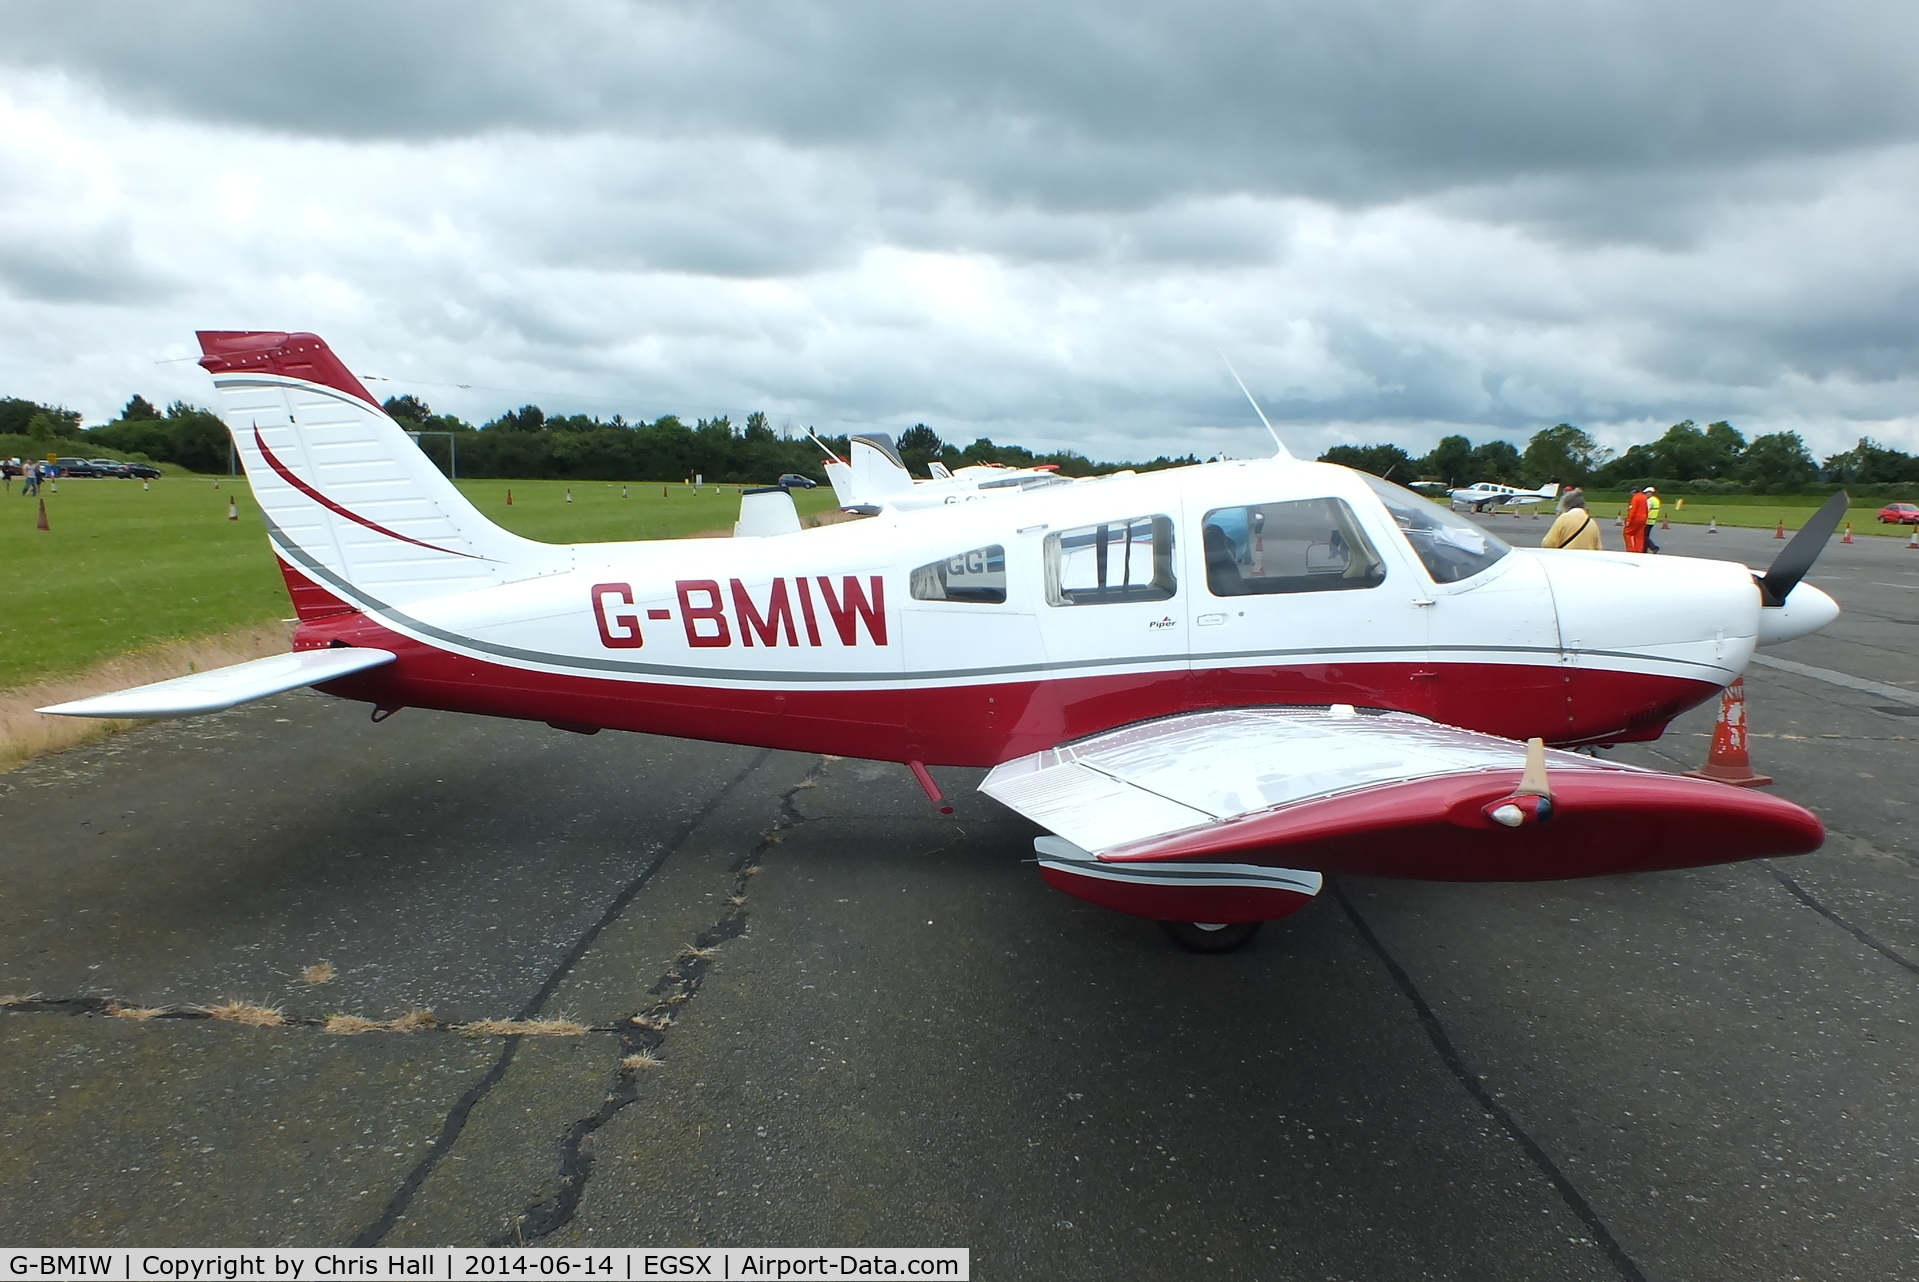 G-BMIW, 1981 Piper PA-28-181 Cherokee Archer II C/N 28-8190093, at the Air Britain fly in